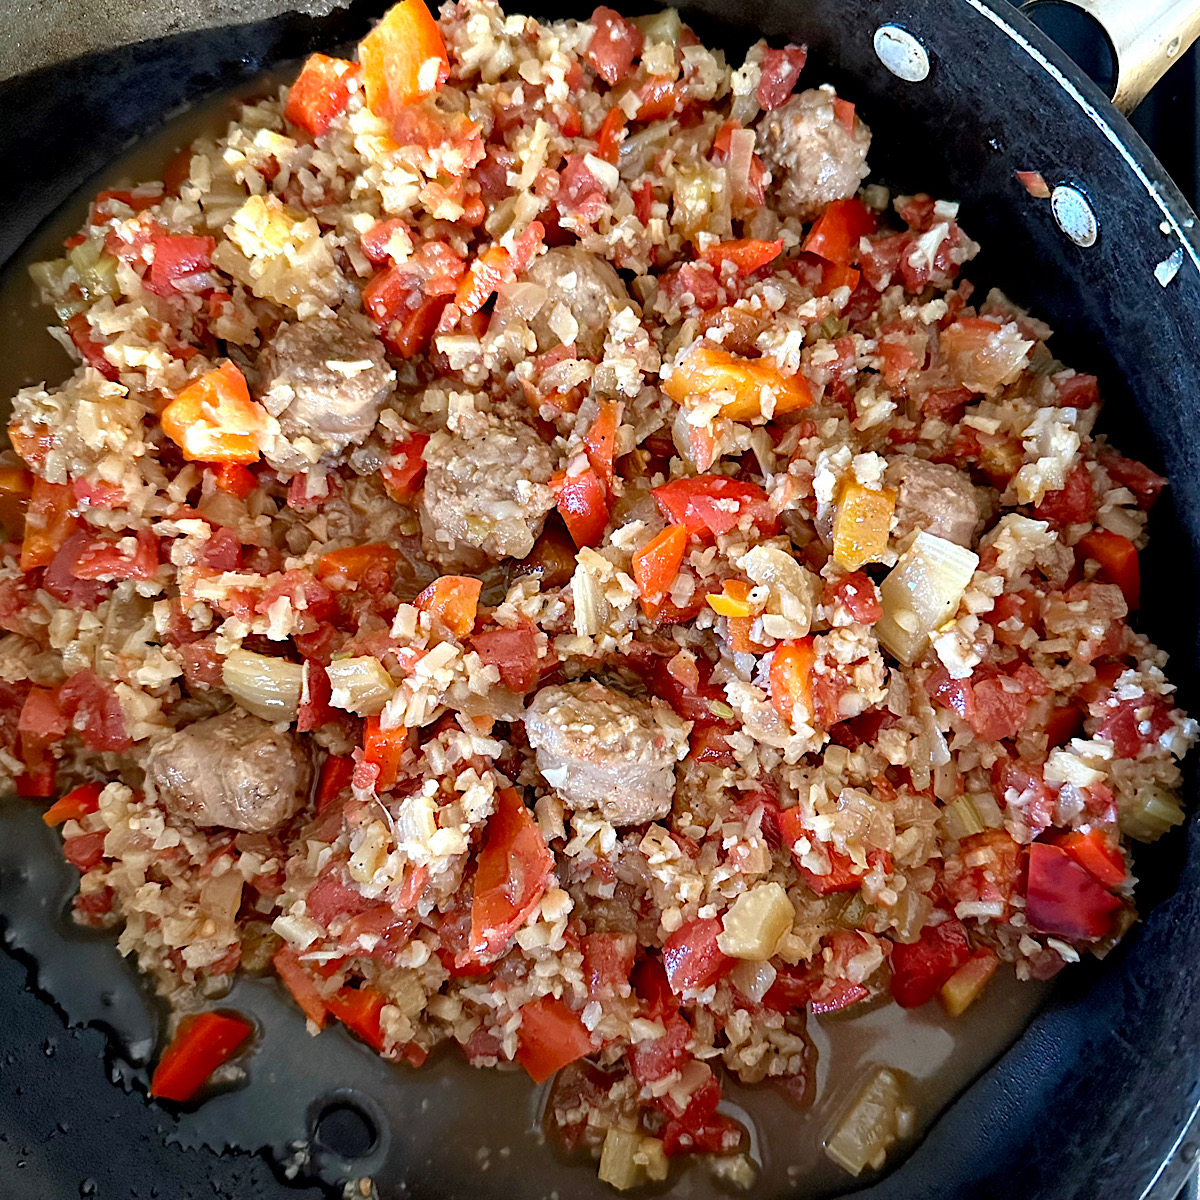 Sausage and sofrito (peppers, onion and celery) cooking in red dutch oven.